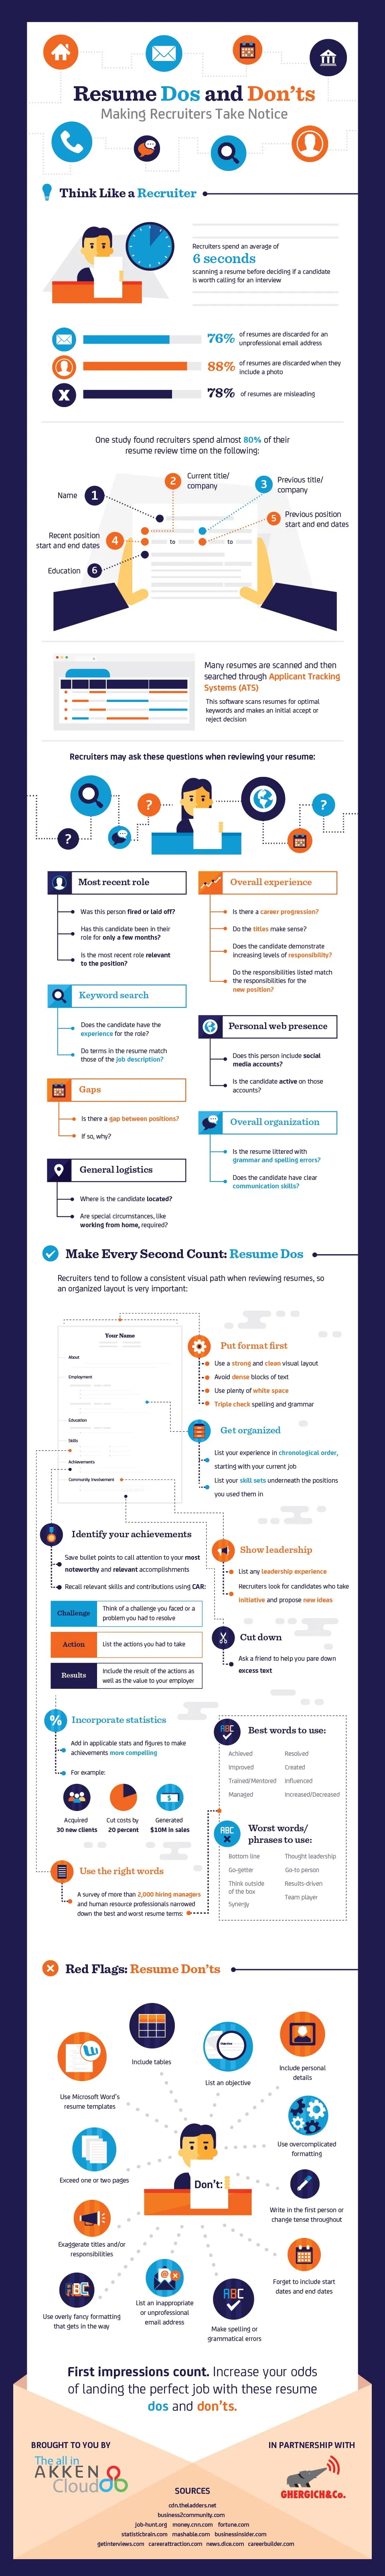 Resume Dos and Don’ts: Making Recruiters Take Notice - #infographic